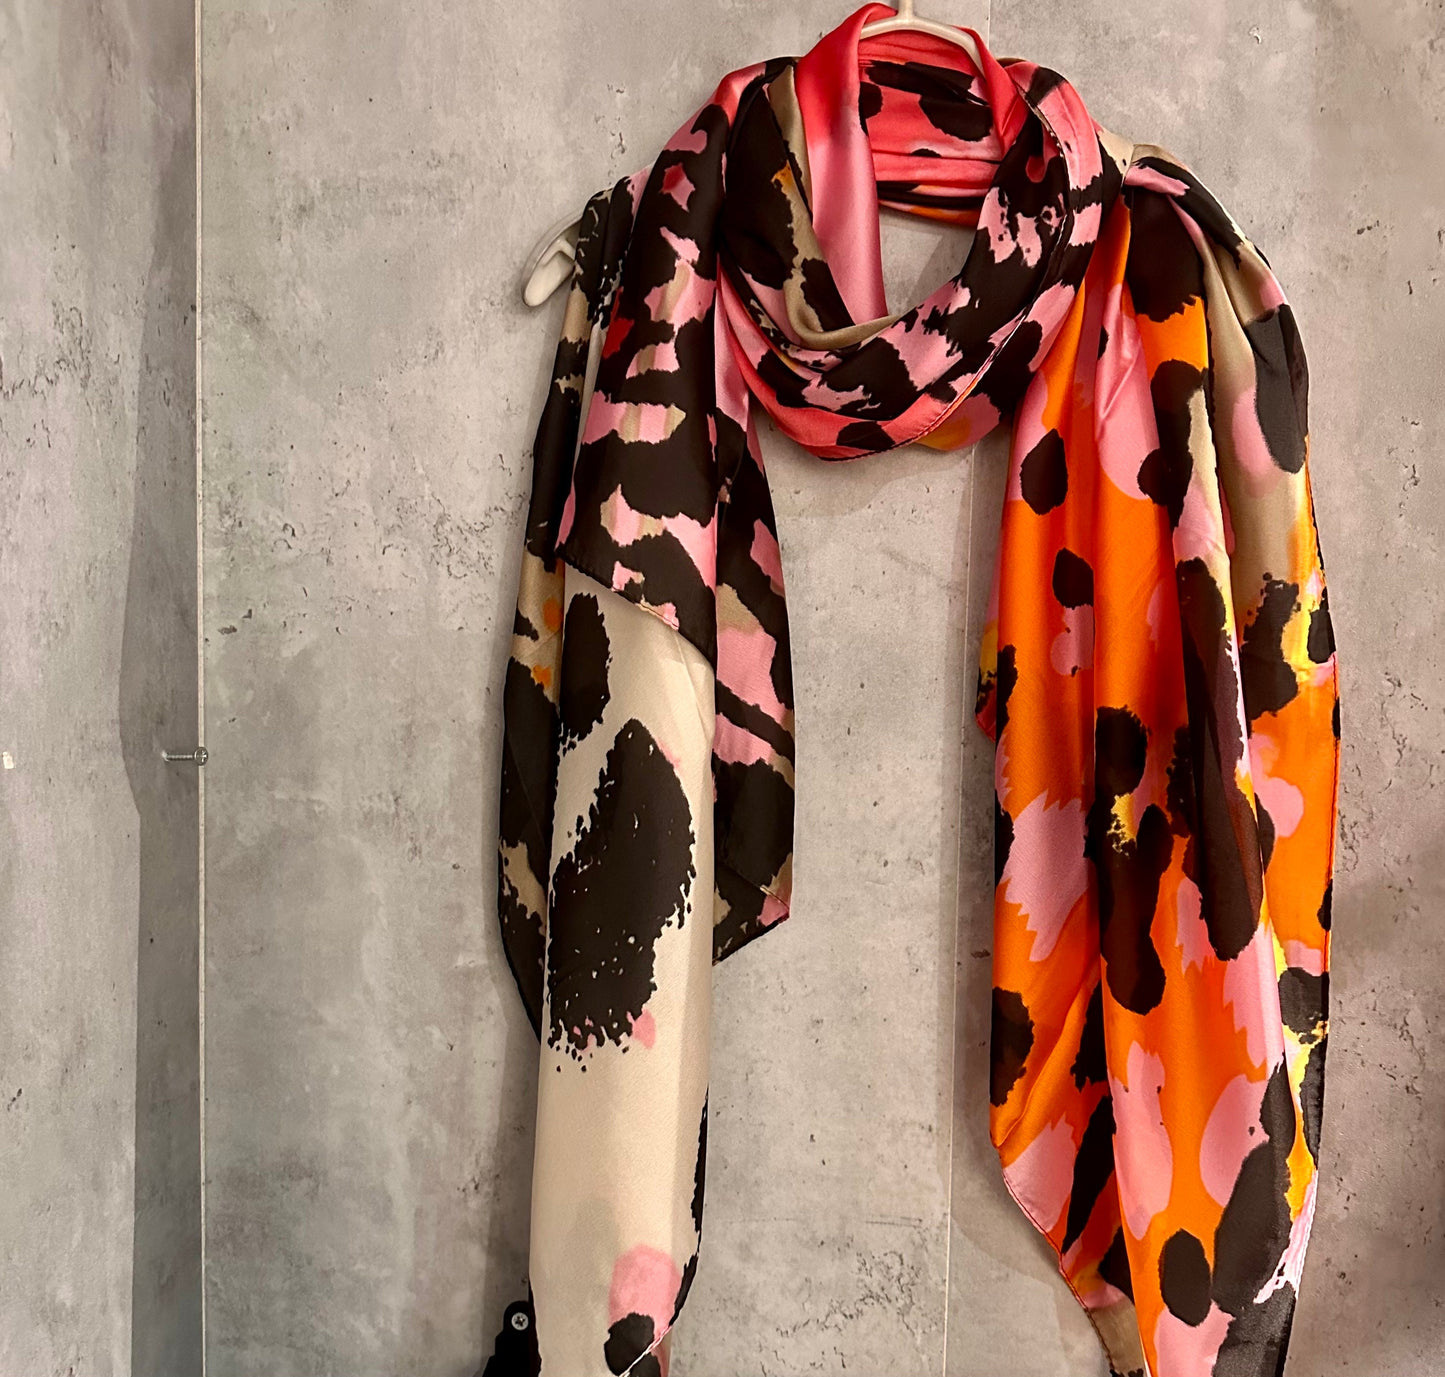 Splotches Colour Pink Orange Silk Scarf/Spring Summer Autumn Scarf/Scarf Women/Gifts For Mom/Gifts For Her Birthday Christmas/UK Seller